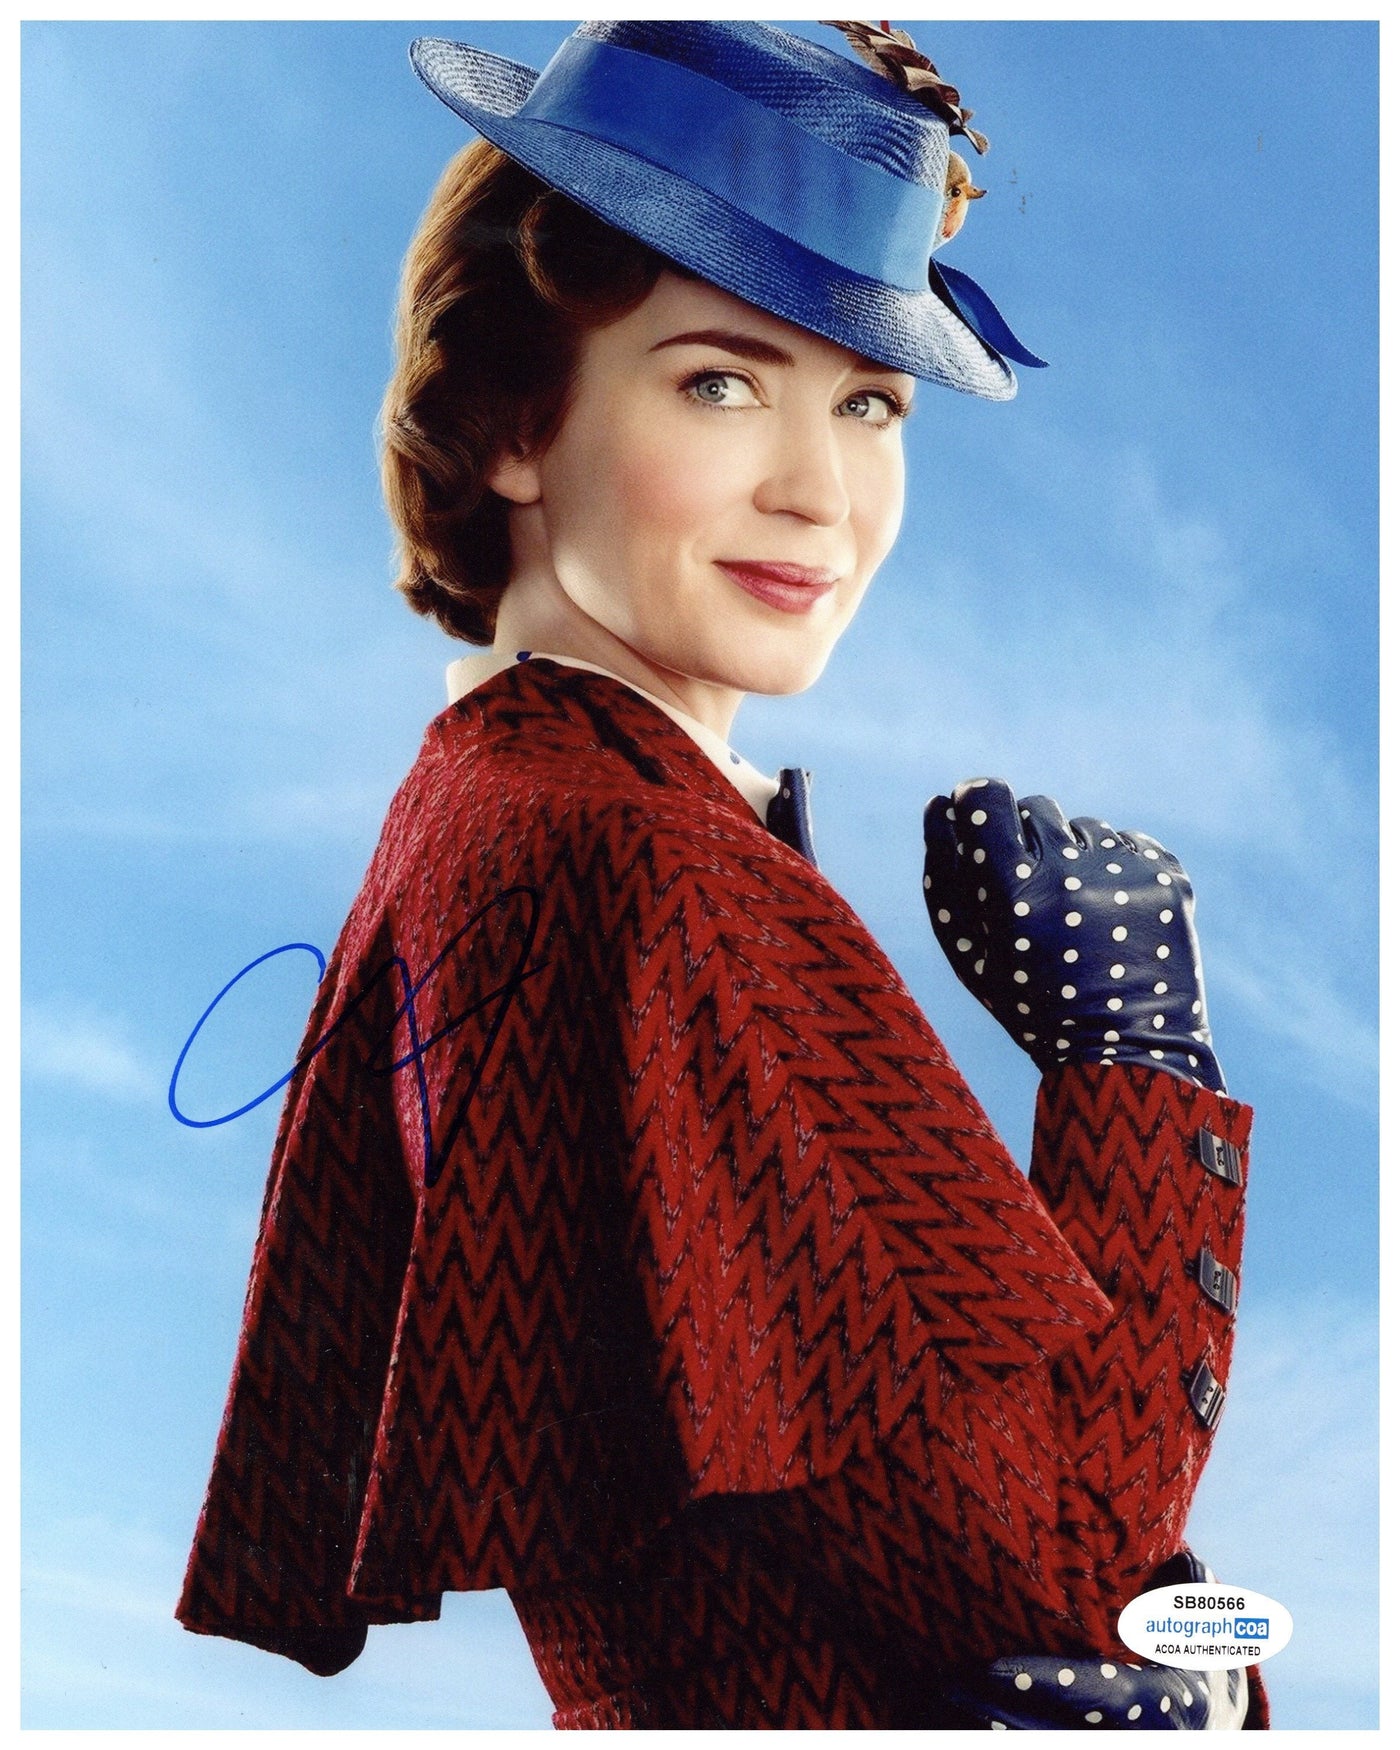 Emily Blunt Signed 8x10 Photo Mary Poppins Autographed ACOA #3